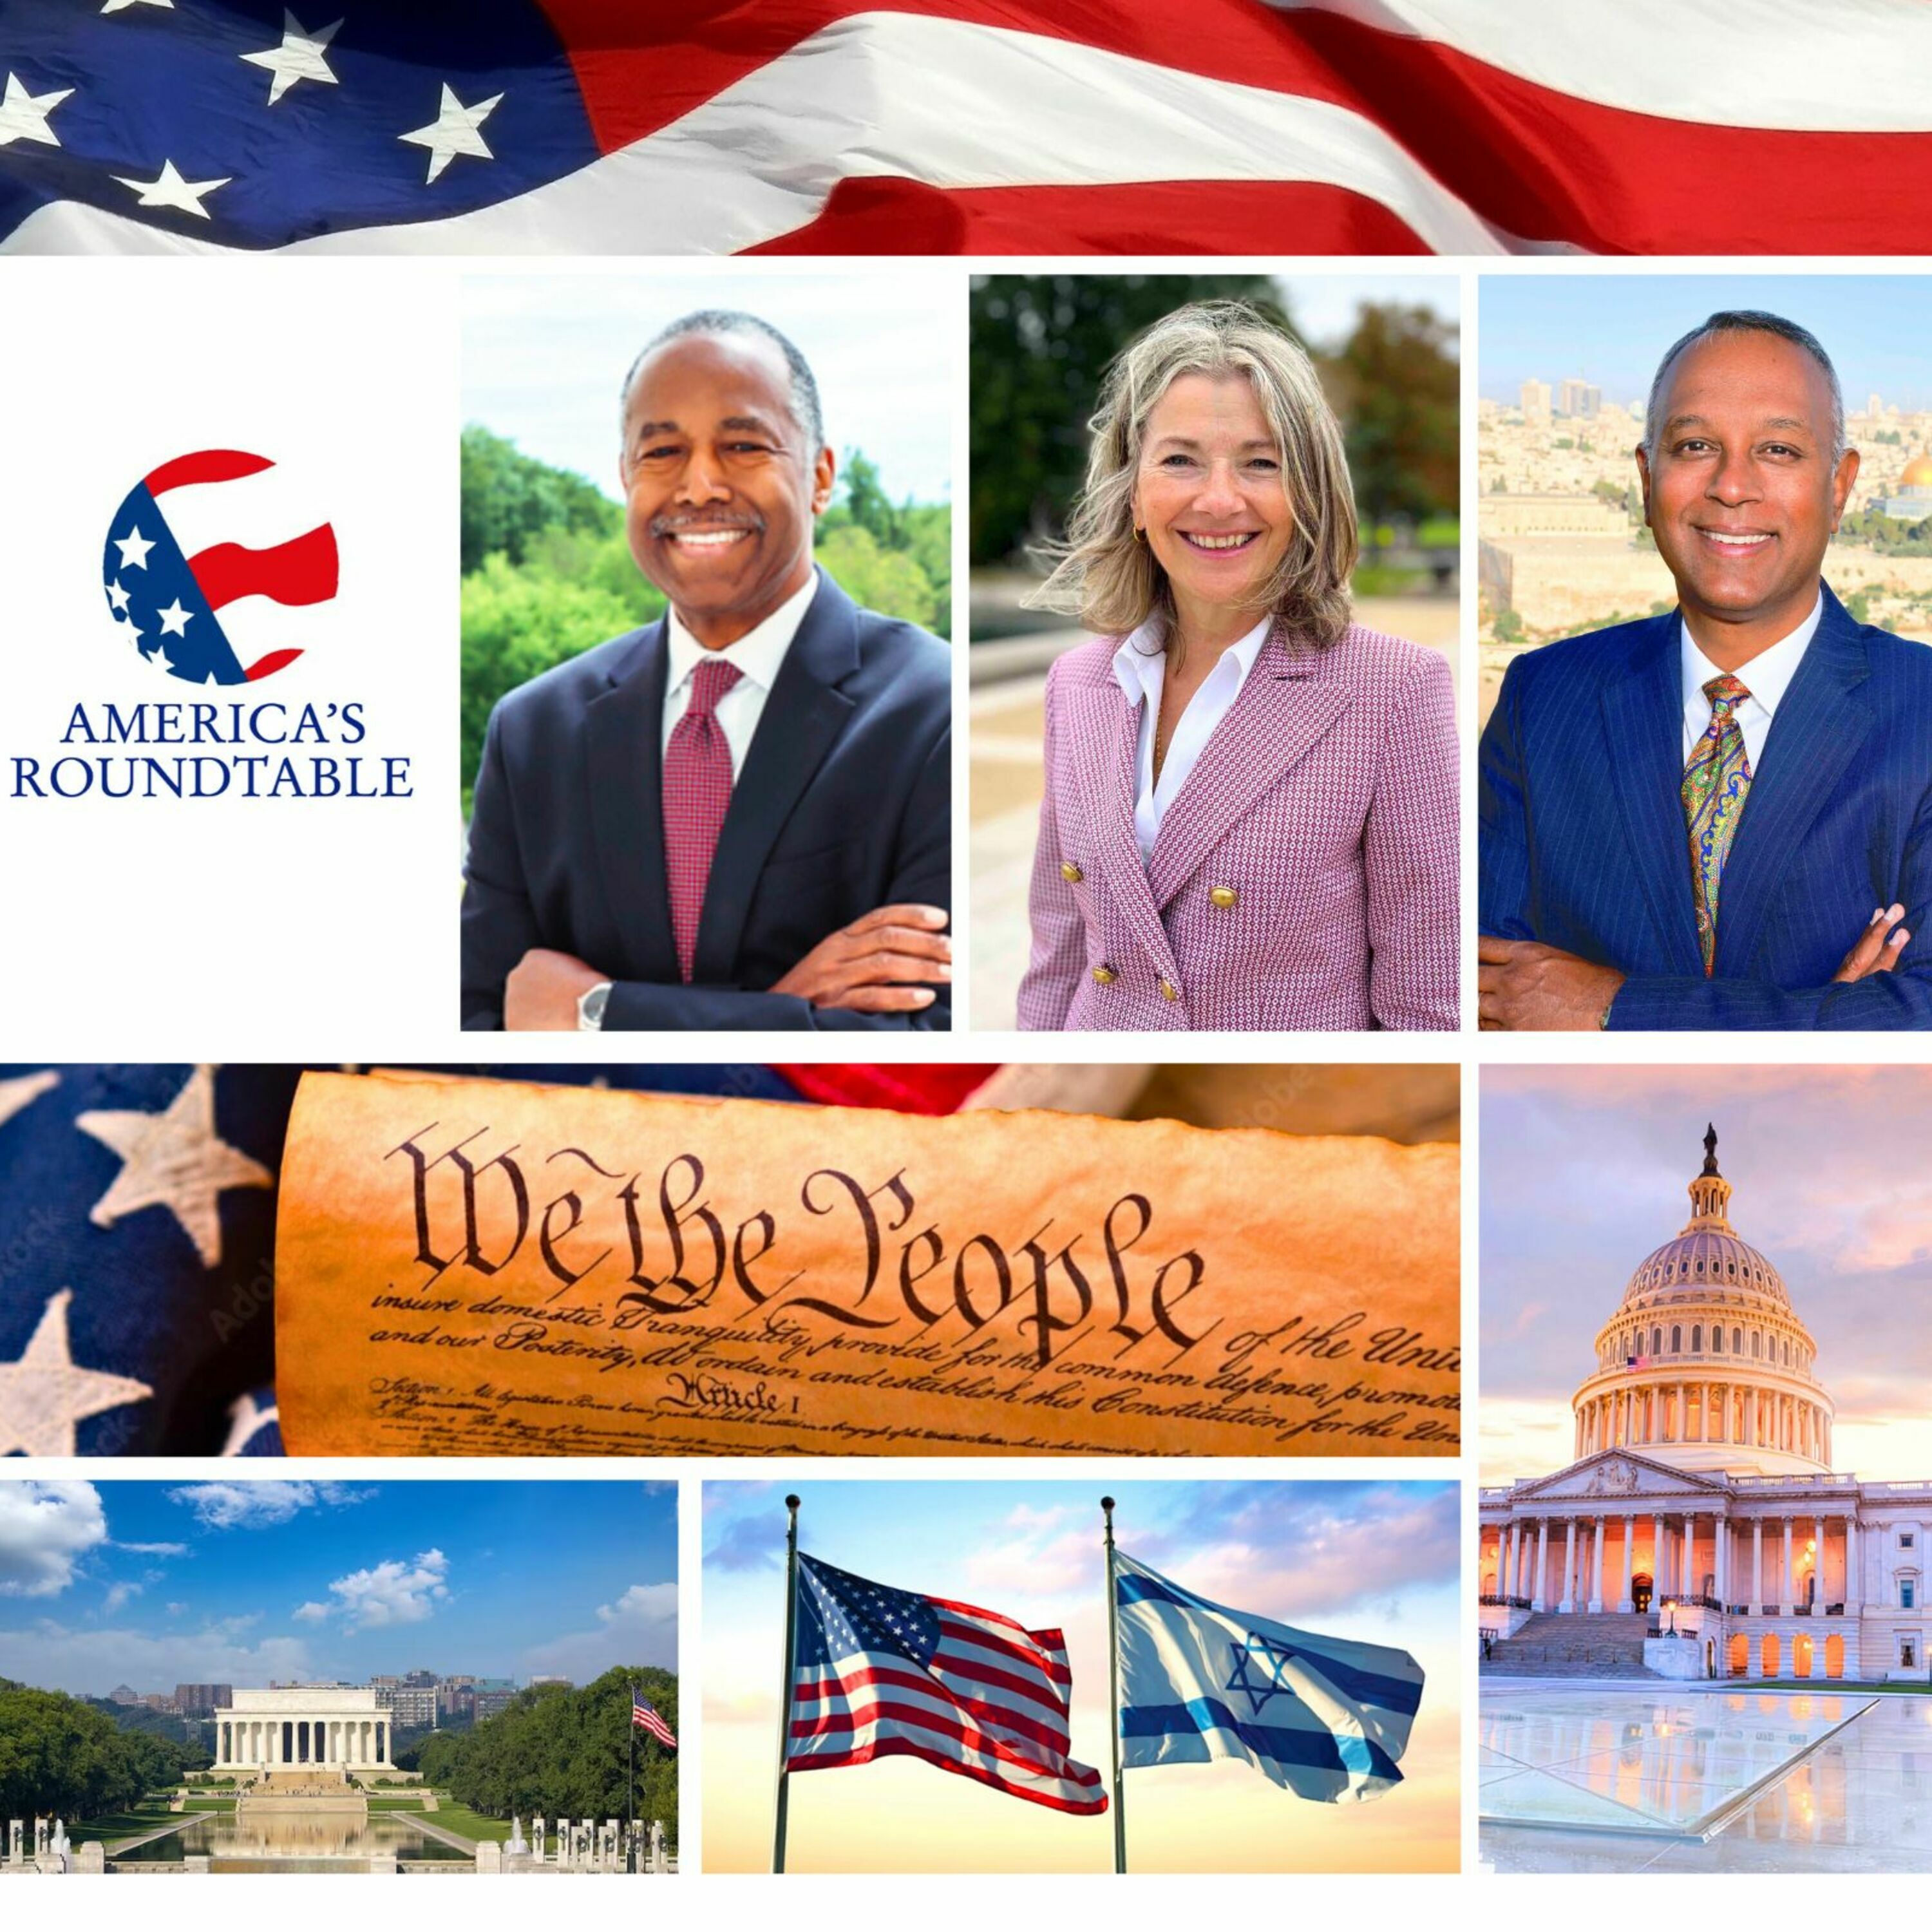 America's Roundtable Conversation with Dr. Ben Carson | Education in America | Significance of Equal Justice Under the Rule of Law | The Vanishing American Dream | Illegal Immigration Crisis | US-Israel Policy Changes Under Biden's Administration